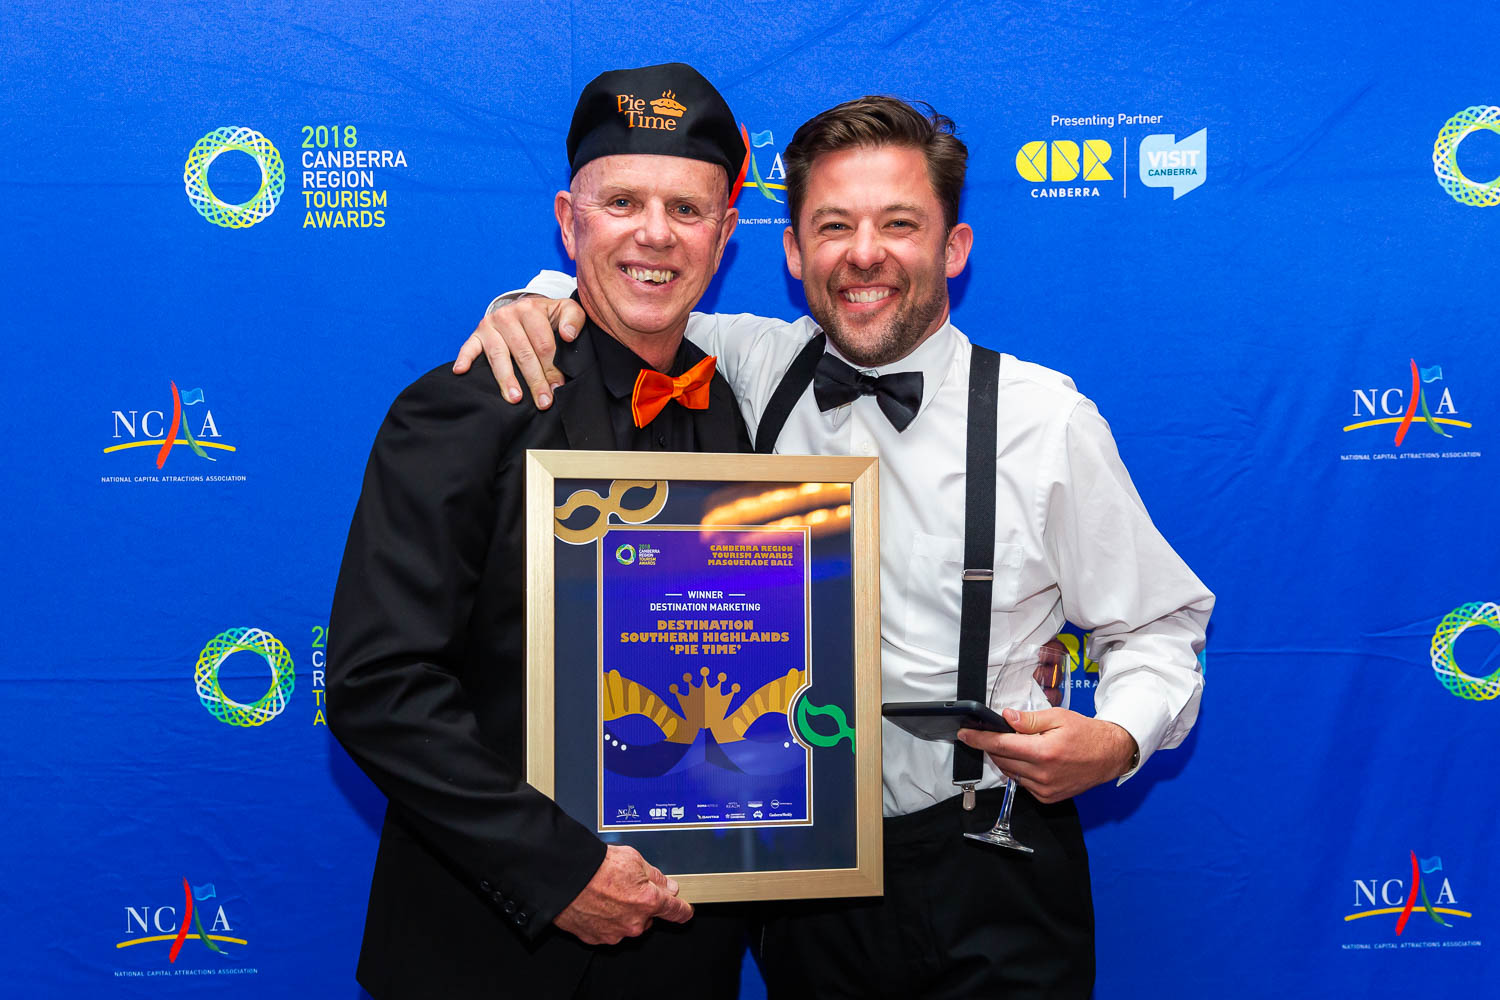 Tourism Awards judging: an interview with Todd Wright